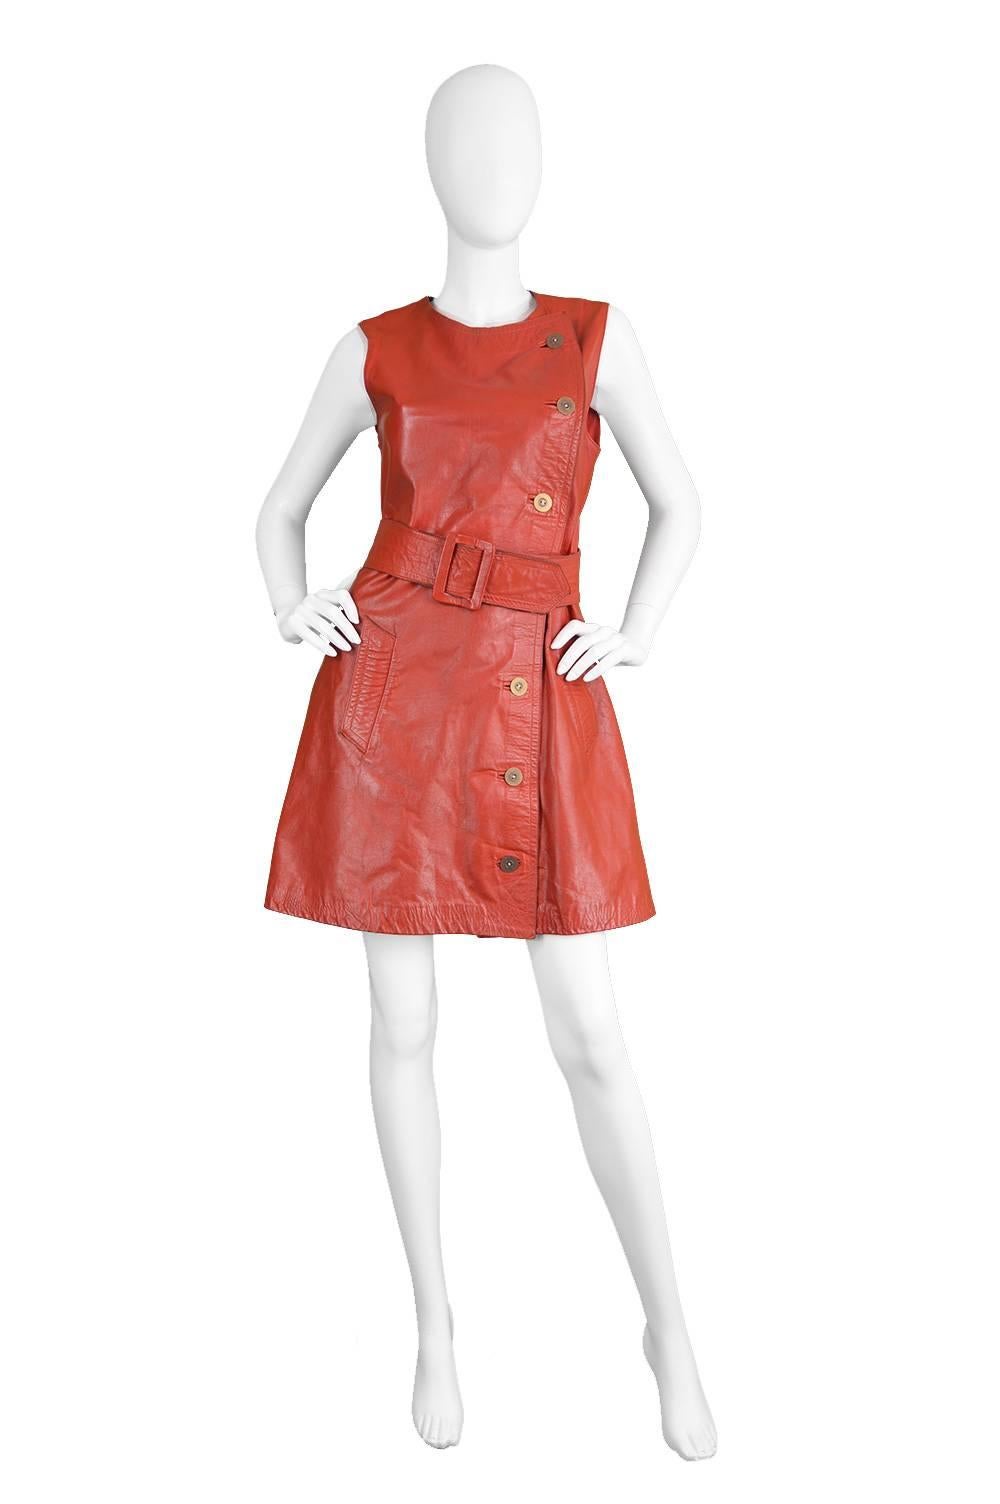 An incredible and rare vintage women's dress from the early 1970s by genius and highly collectible British designer, Jean Muir for Morel of London. Still so current, this dress is in a supple red leather with an asymmetrical button fastening and a